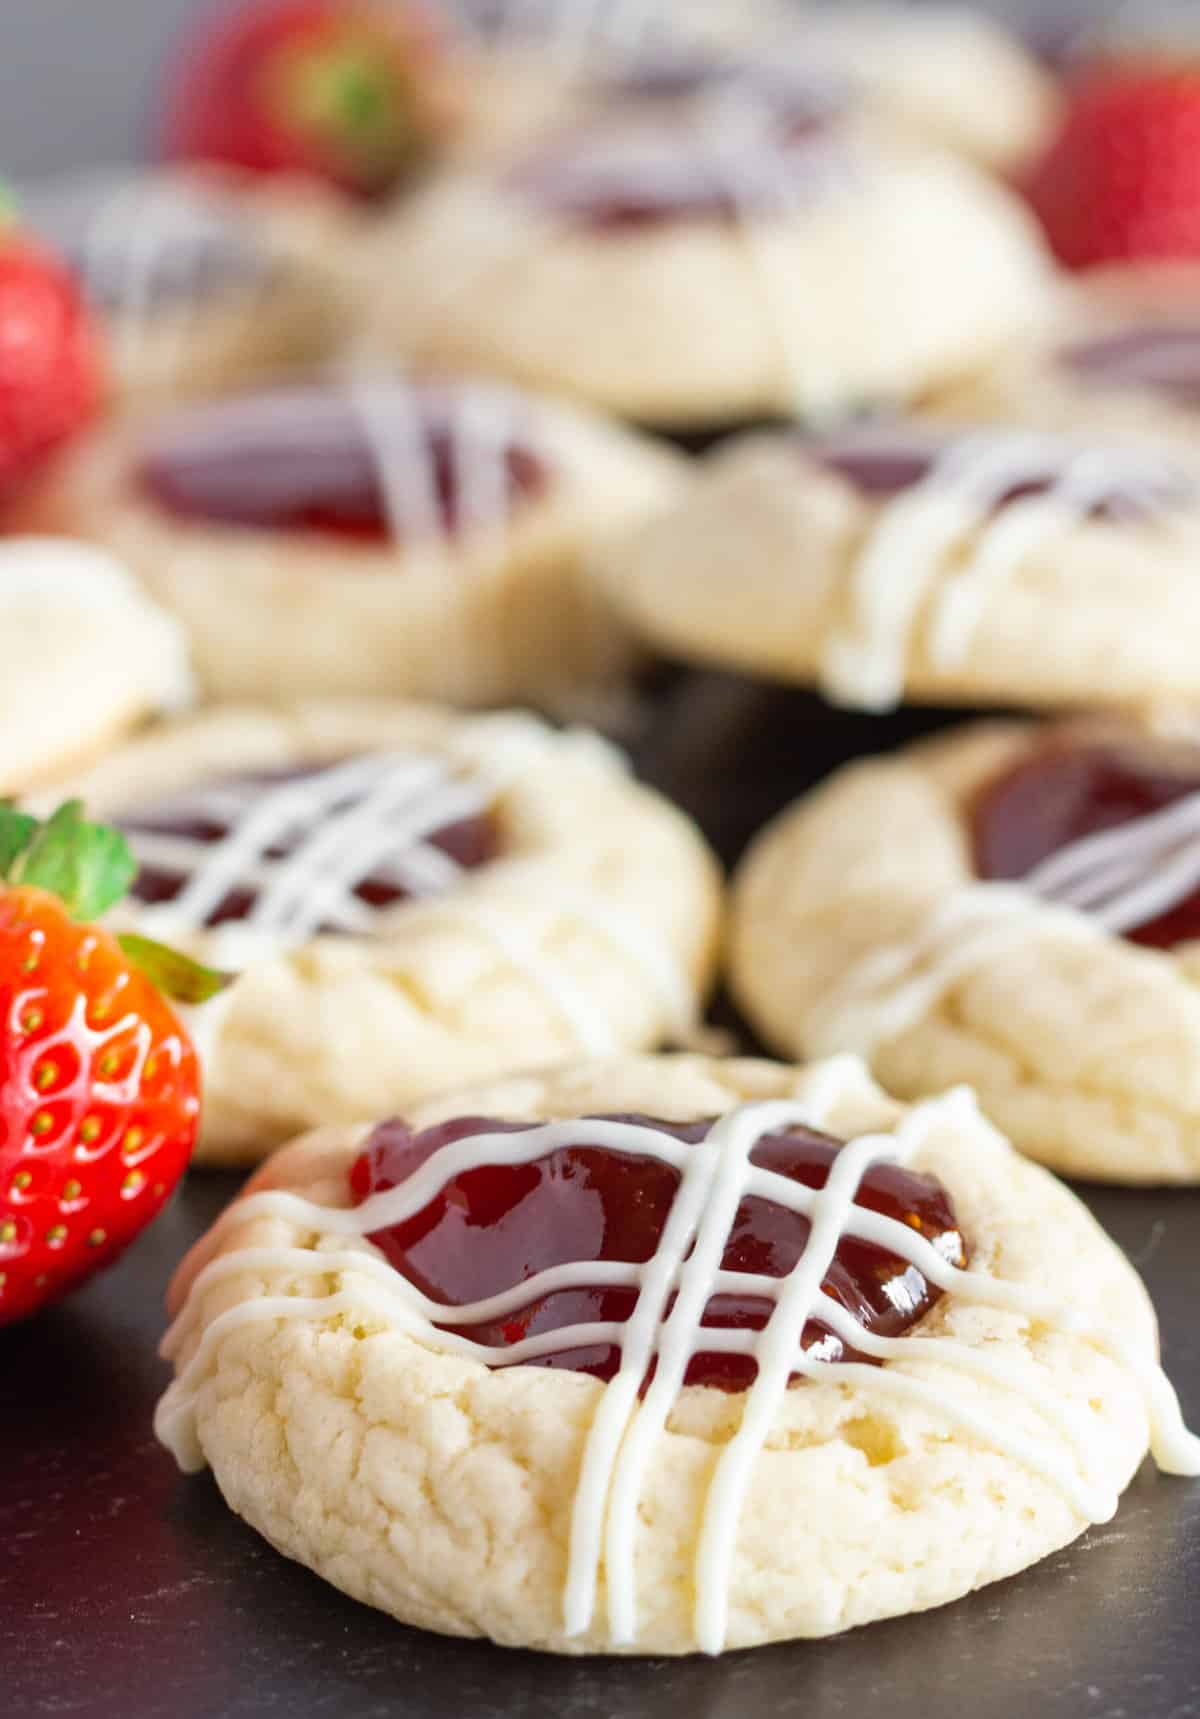 Strawberry Jam Cookies with a drizzle of white chocolate.